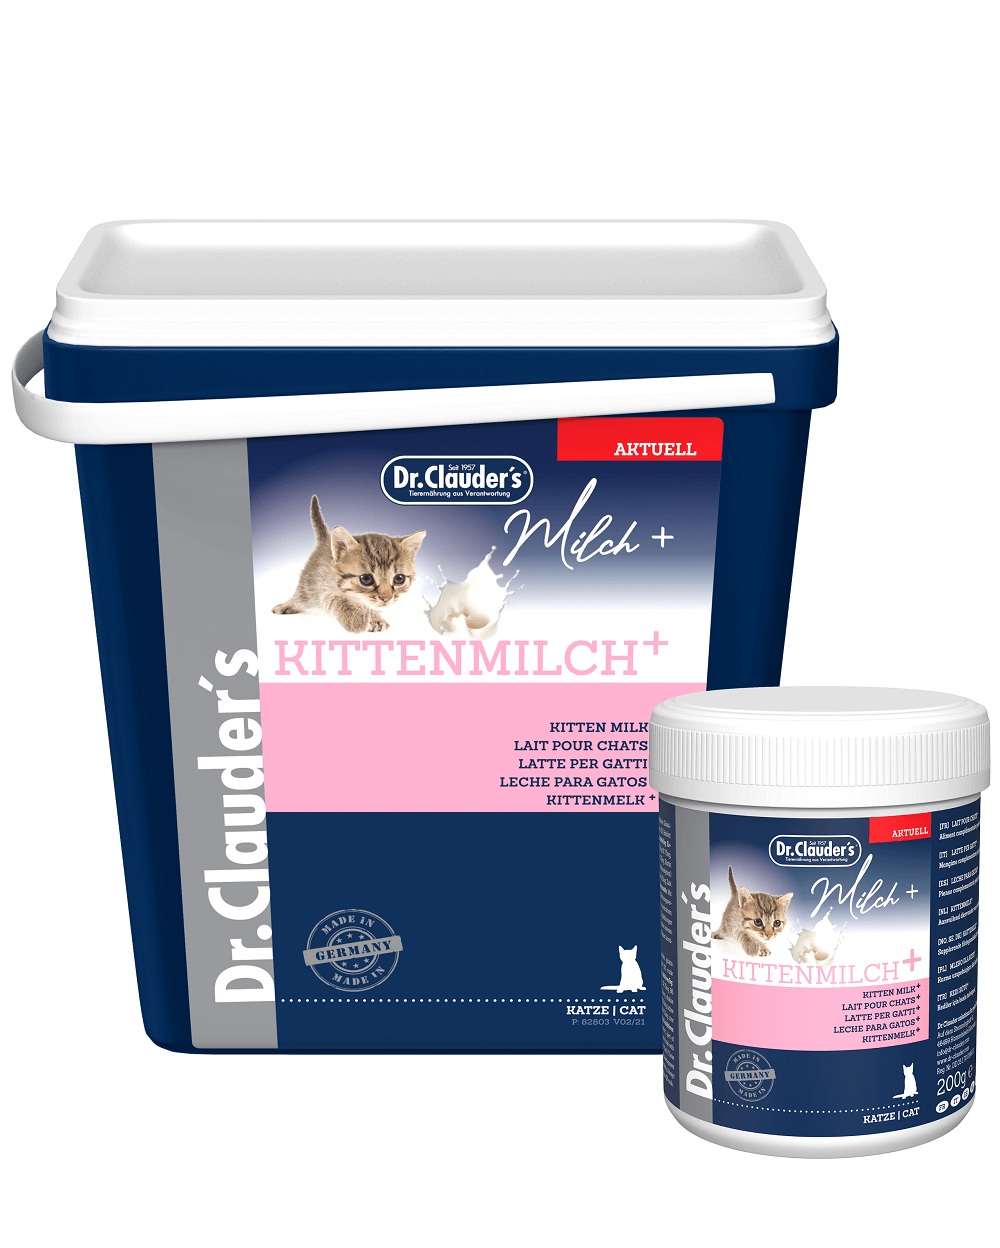 Dr.Clauder's Pro Life - Kittenmilch+